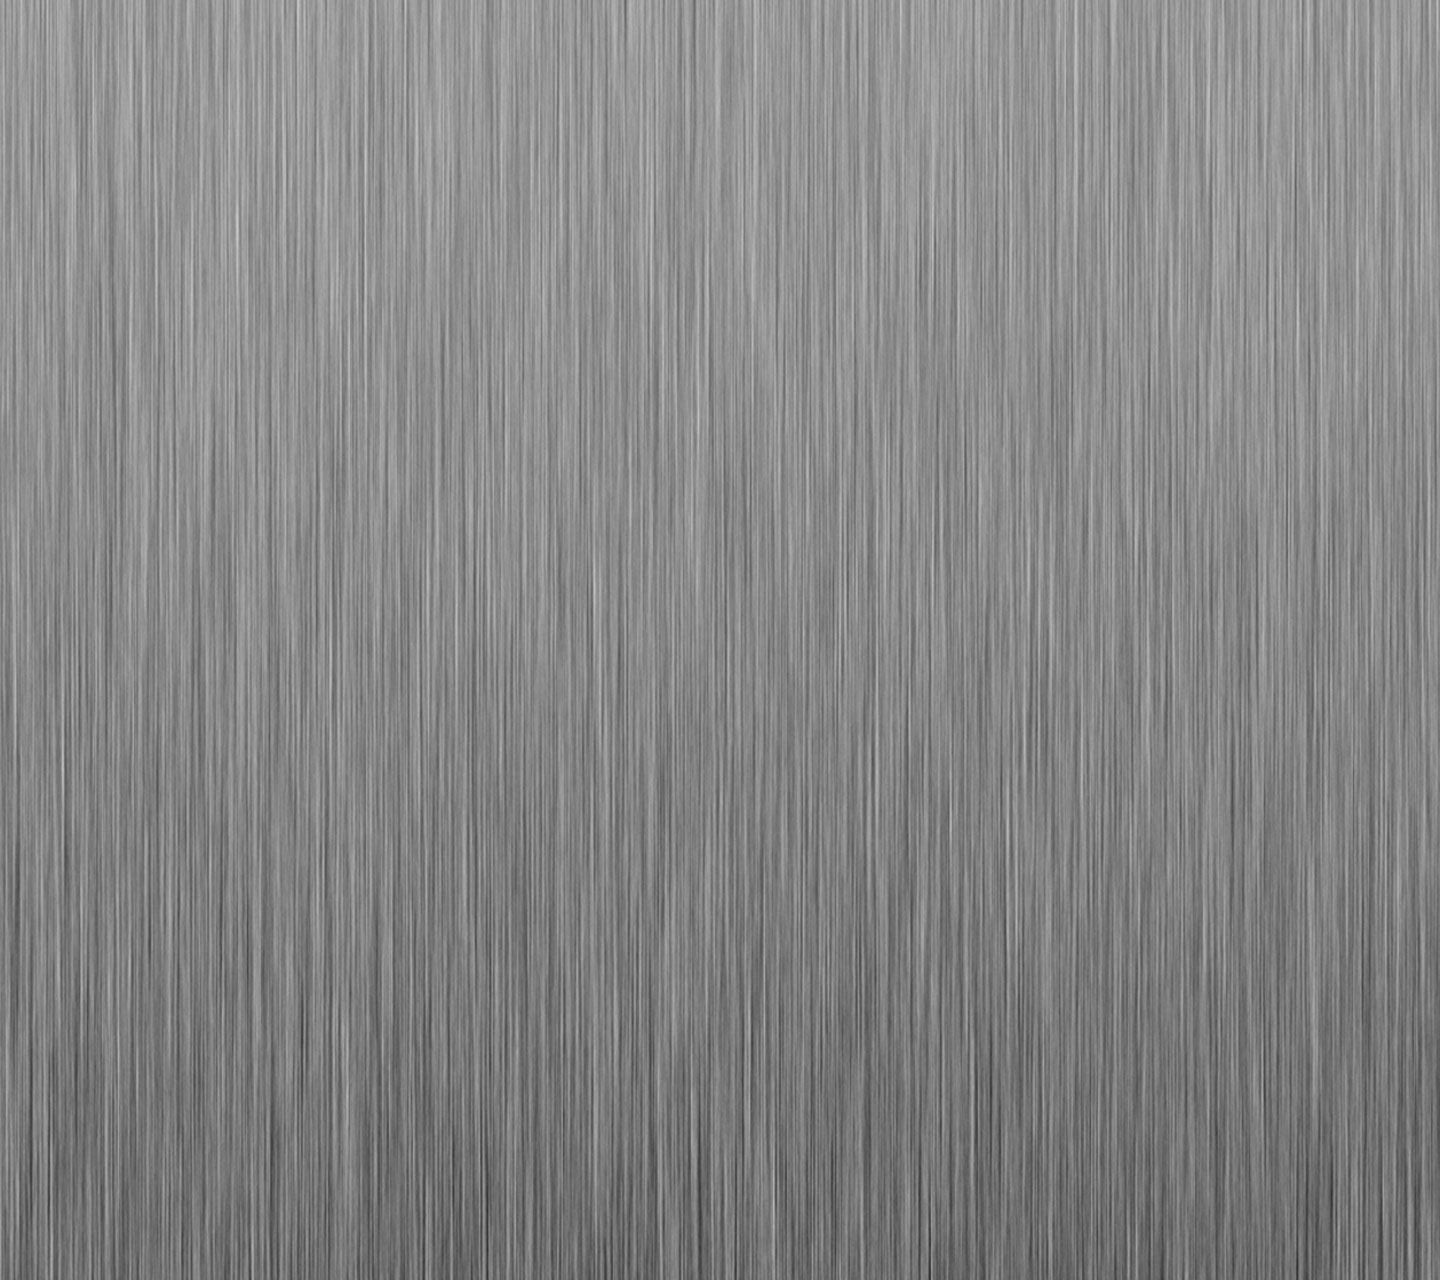 Stainless Steel Wallpaper New Another Free Steel Aluminum Brushed Metal Texture Texture In 2019 Of the Day of The Hudson